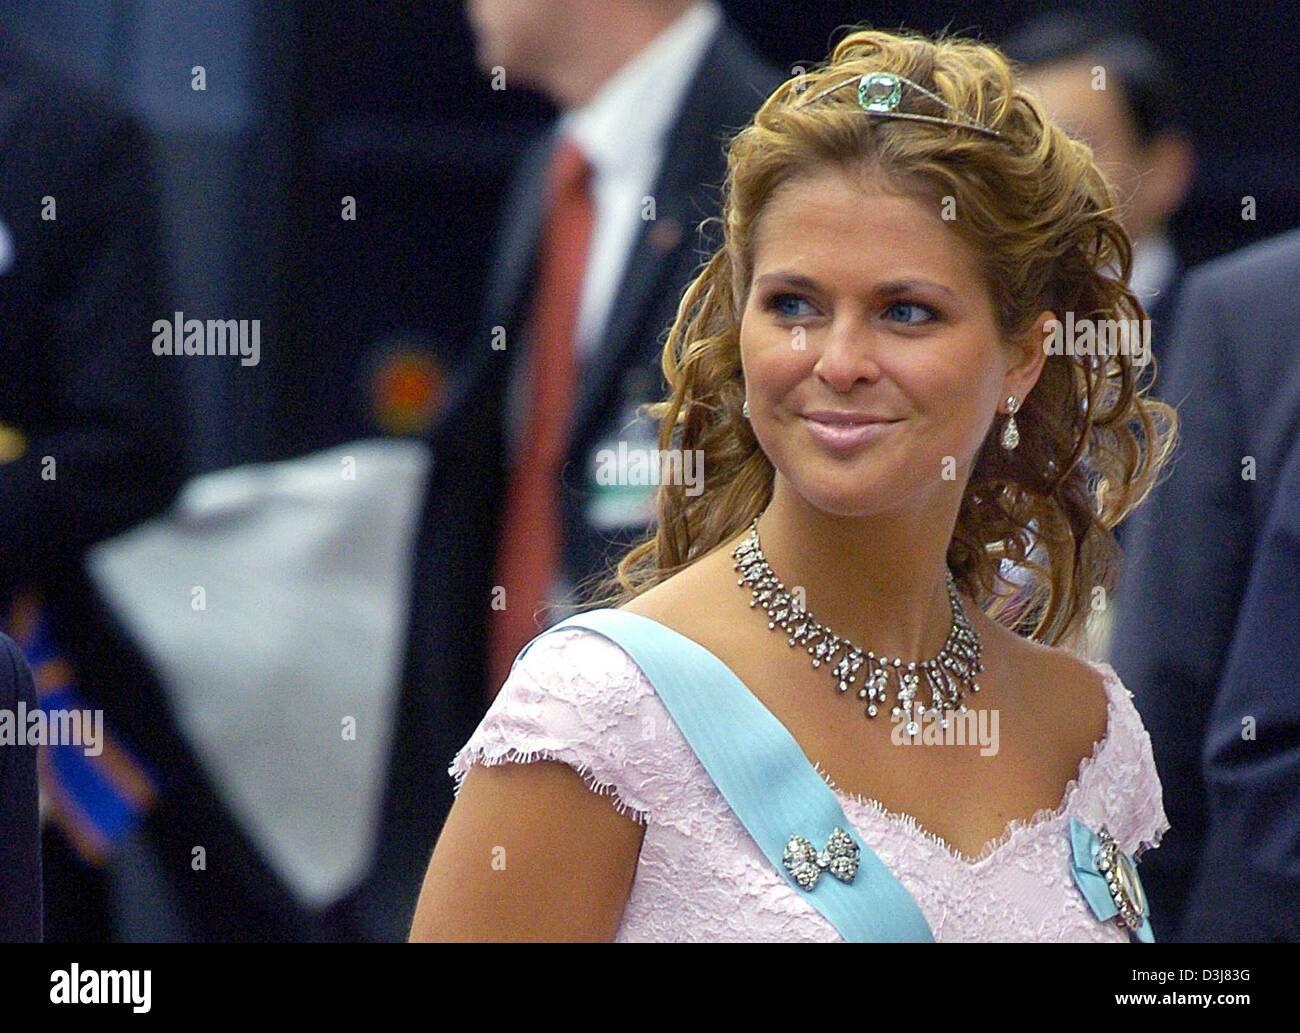 (dpa) - Swedish princess Madeleine smiles on her arrival to the wedding of Danish crown prince Frederik and Mary Donaldson at the cathedral in Copenhagen, Denmark, Friday, 14 May 2004. Members of all European royal dynasties were among the 800 invited guests who attended the wedding. Stock Photo